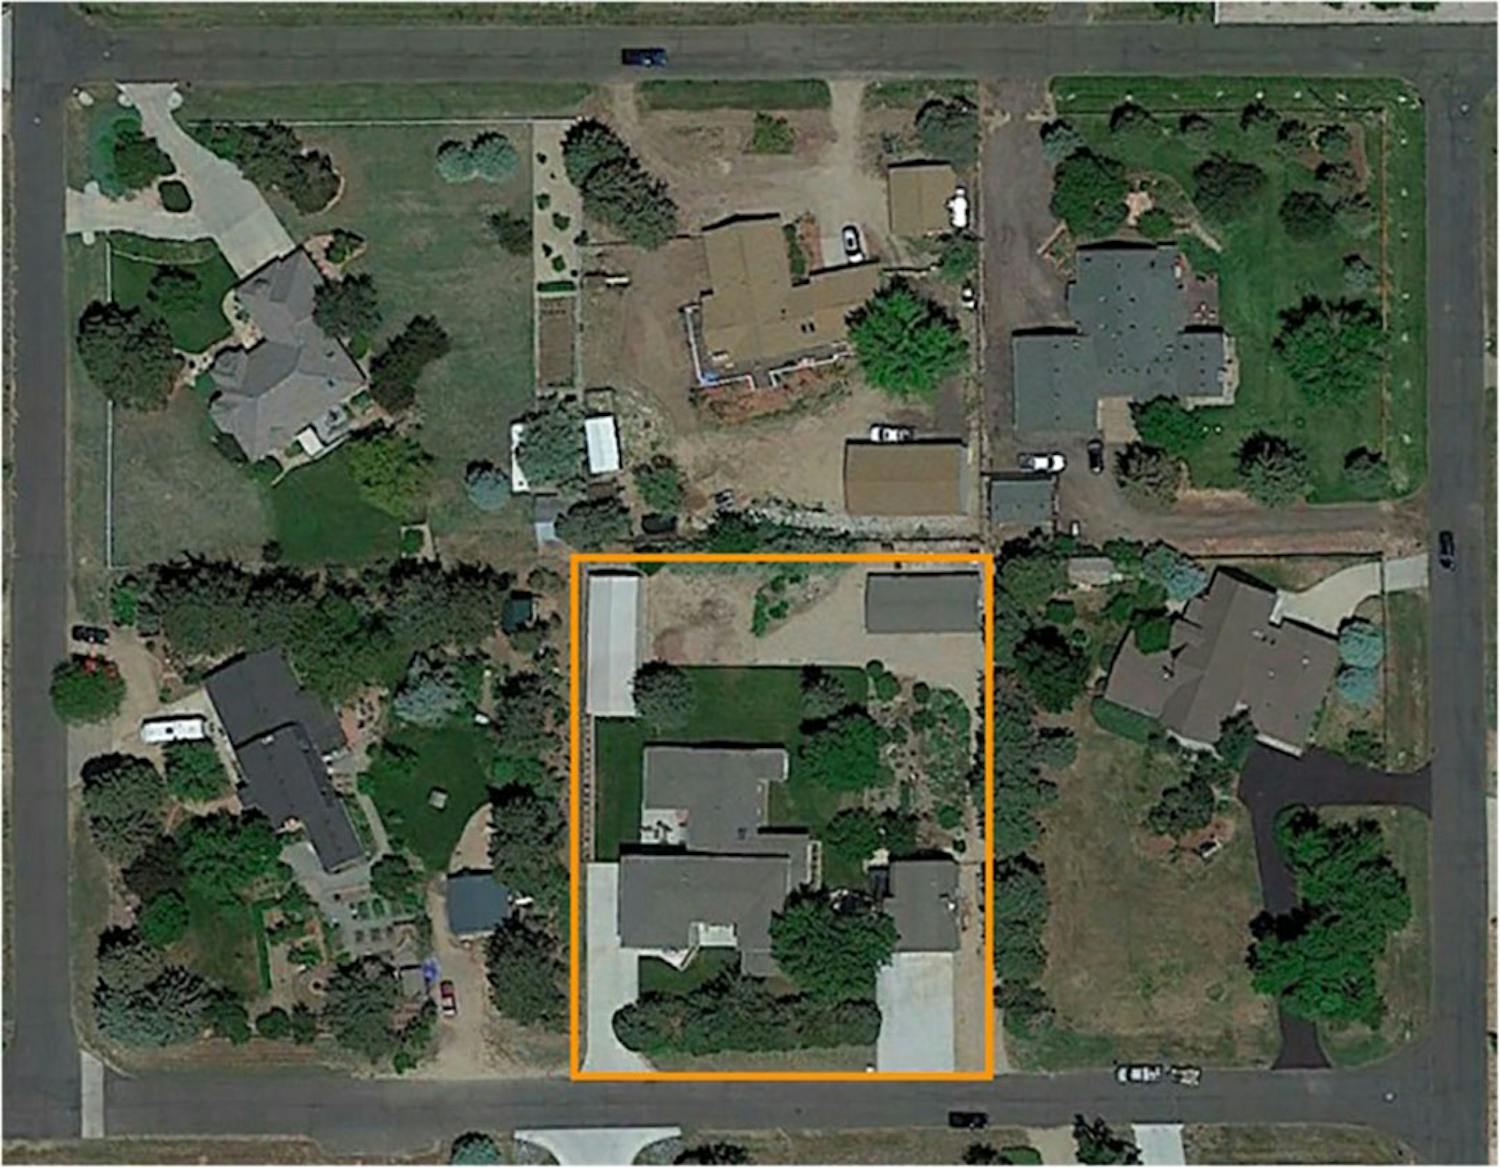 Single-family on large lot, more than 1/2 acre